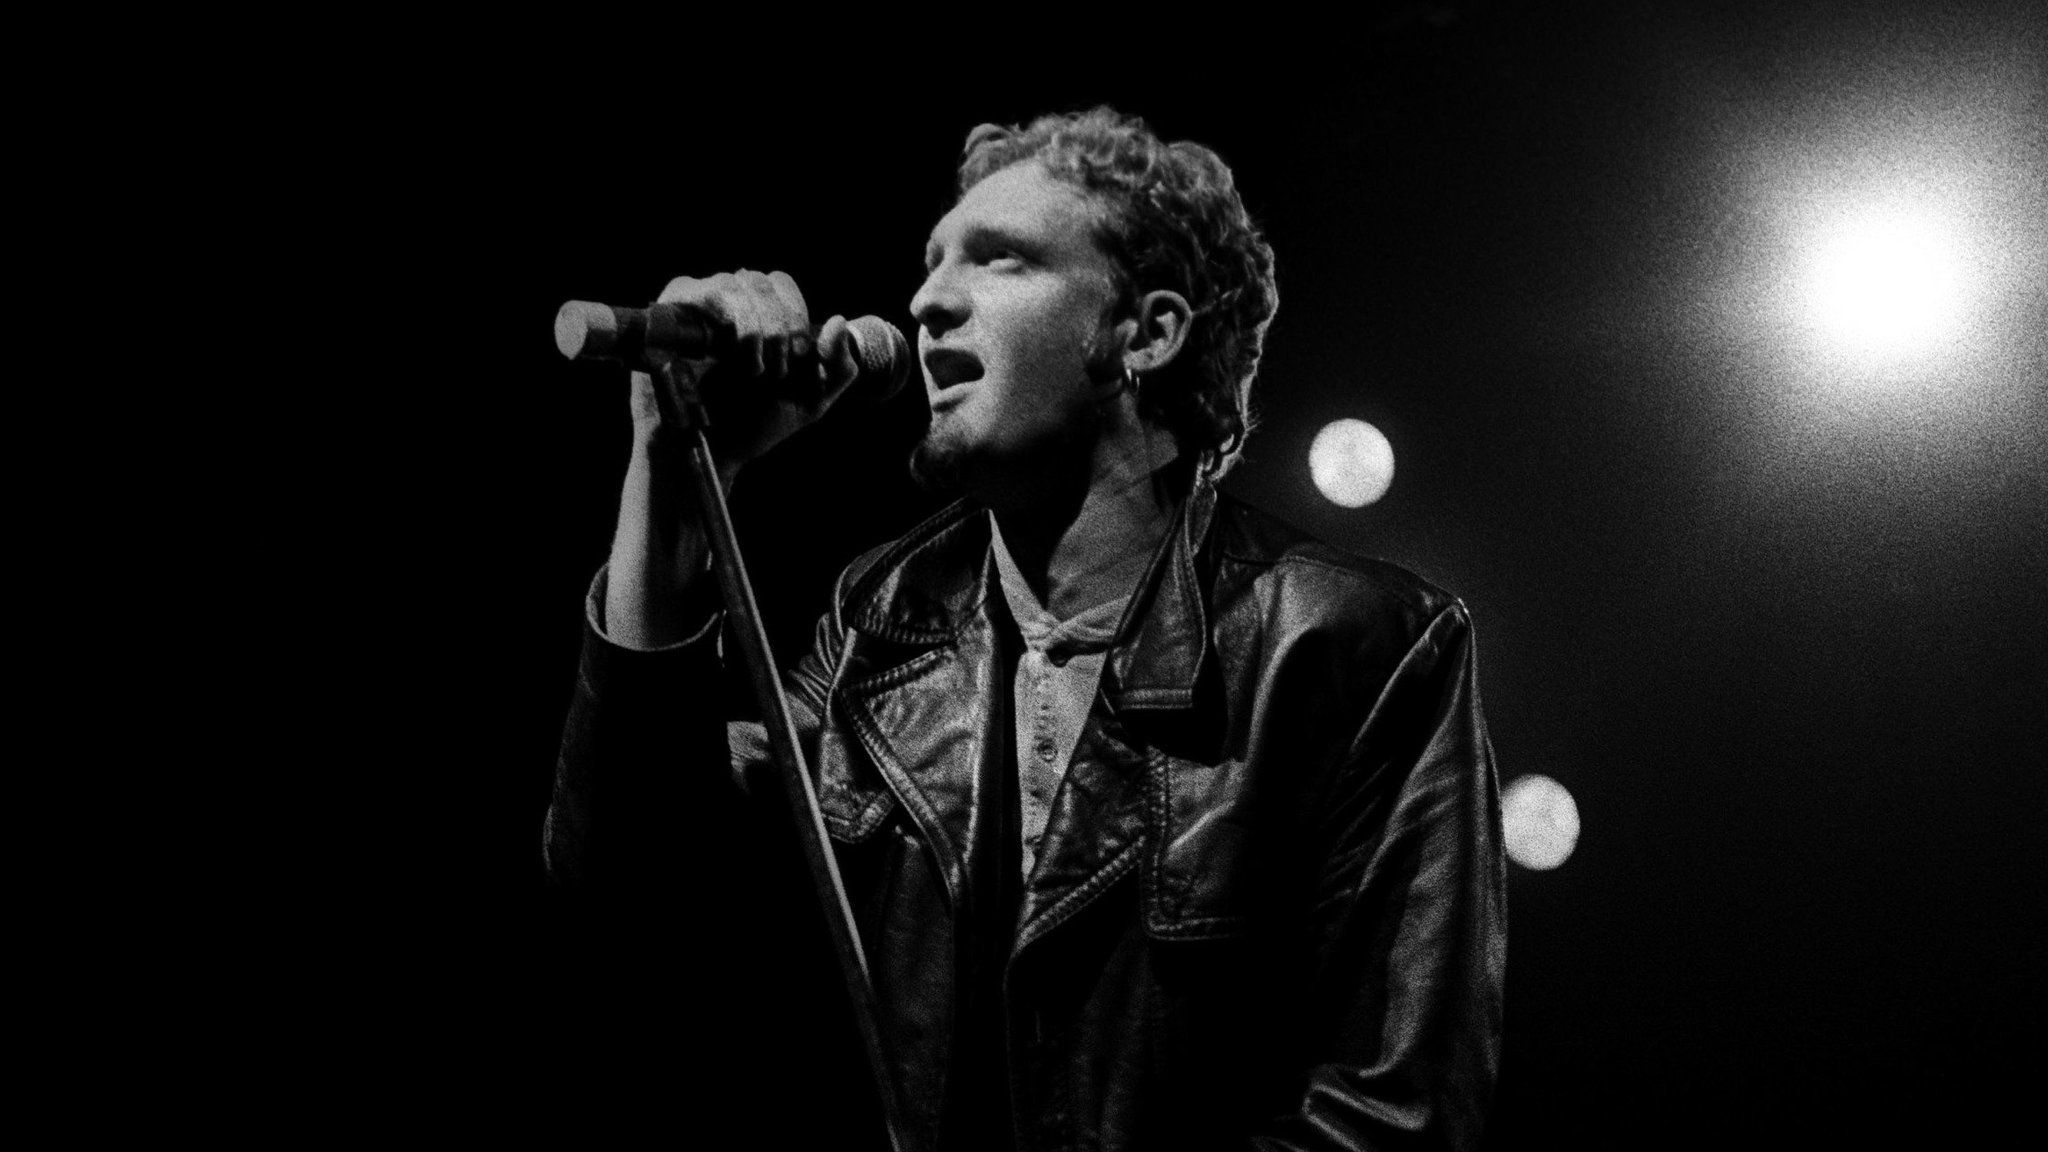 kexp birthday, Layne Staley! The legendary rocker was born in Kirkland, WA on this day in 1967 this year, Mayor has proclaimed Aug. 22 Layne